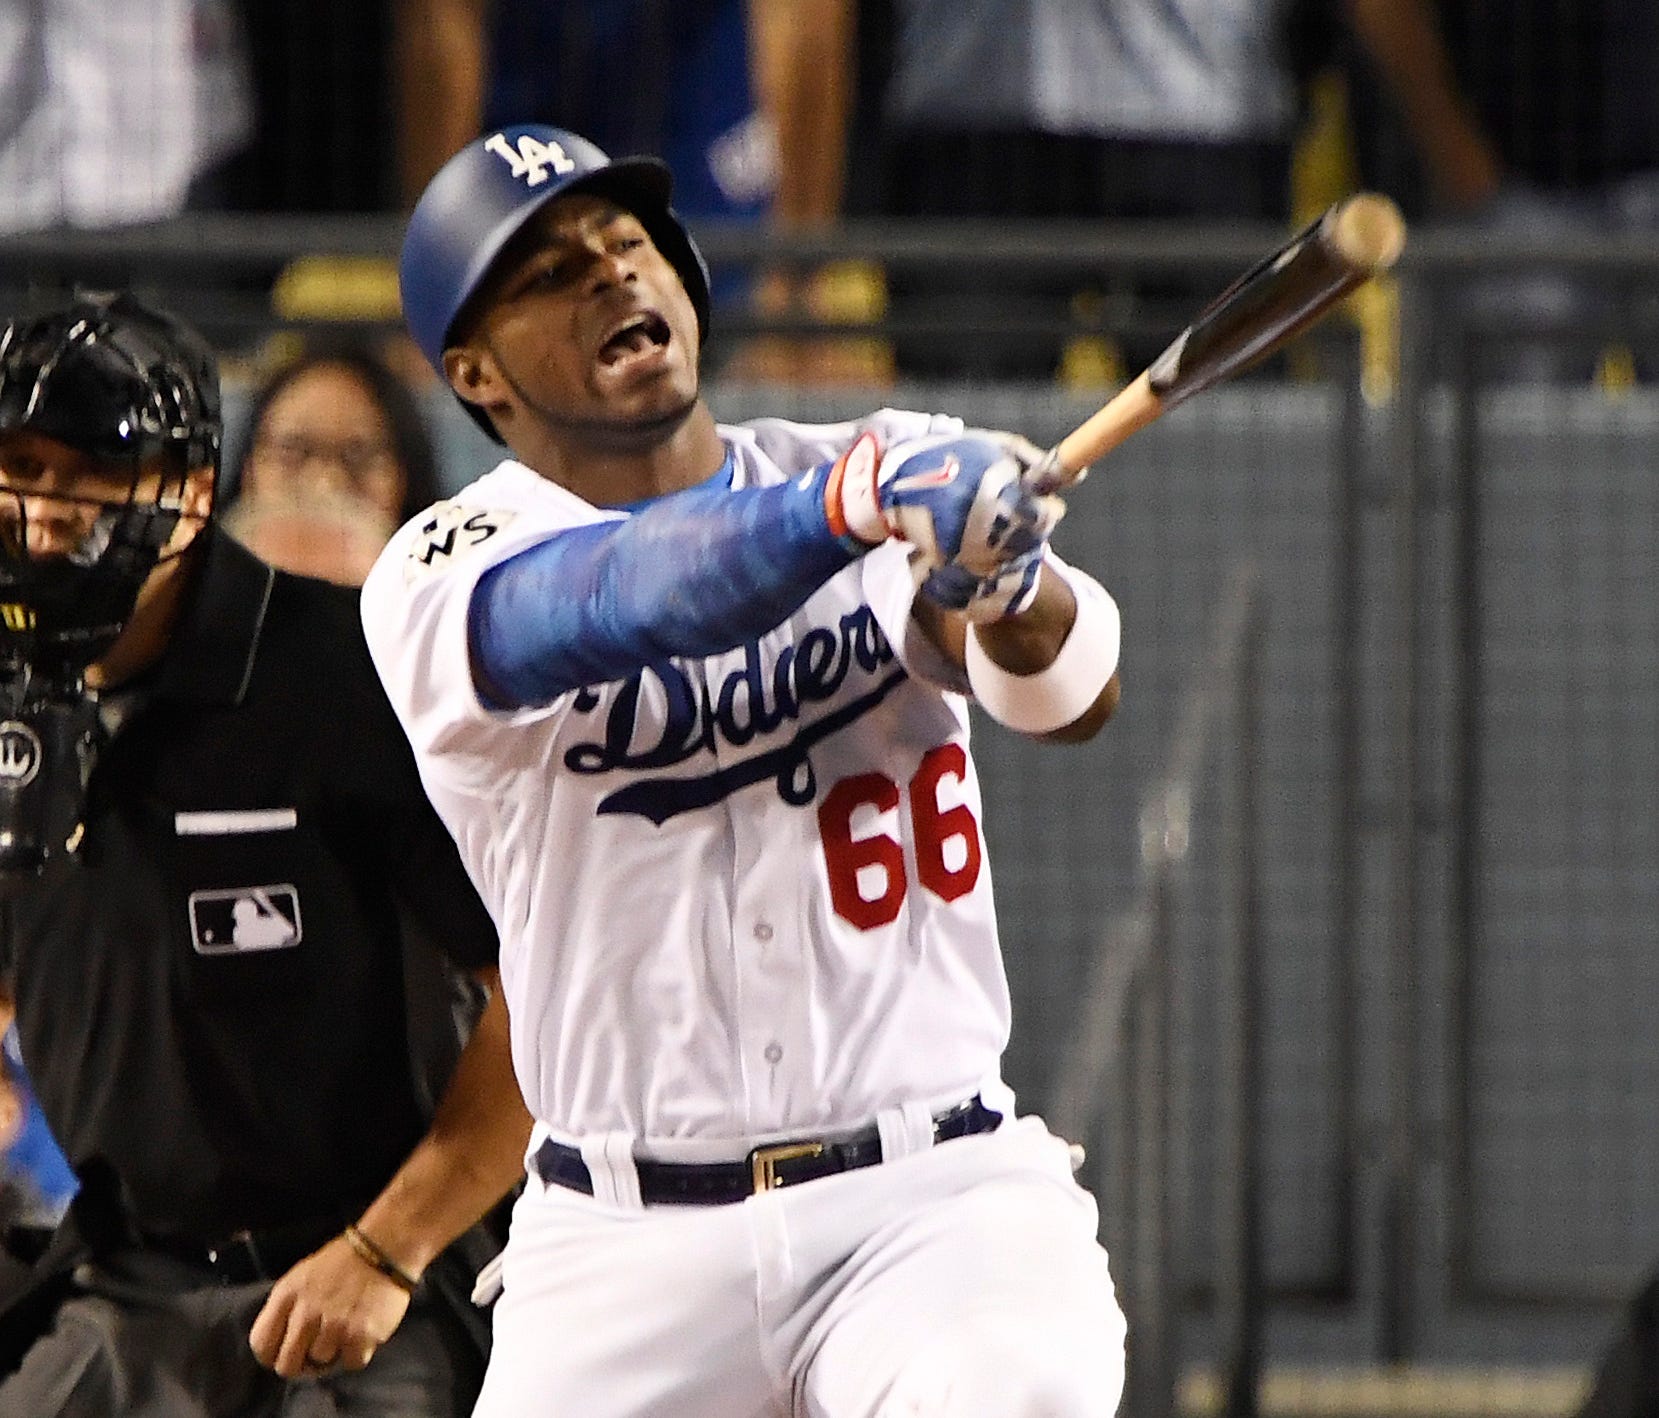 Los Angeles Dodgers right fielder Yasiel Puig (66) reacts at bat in the fifth inning against the Houston Astros in game seven of the 2017 World Series at Dodger Stadium.